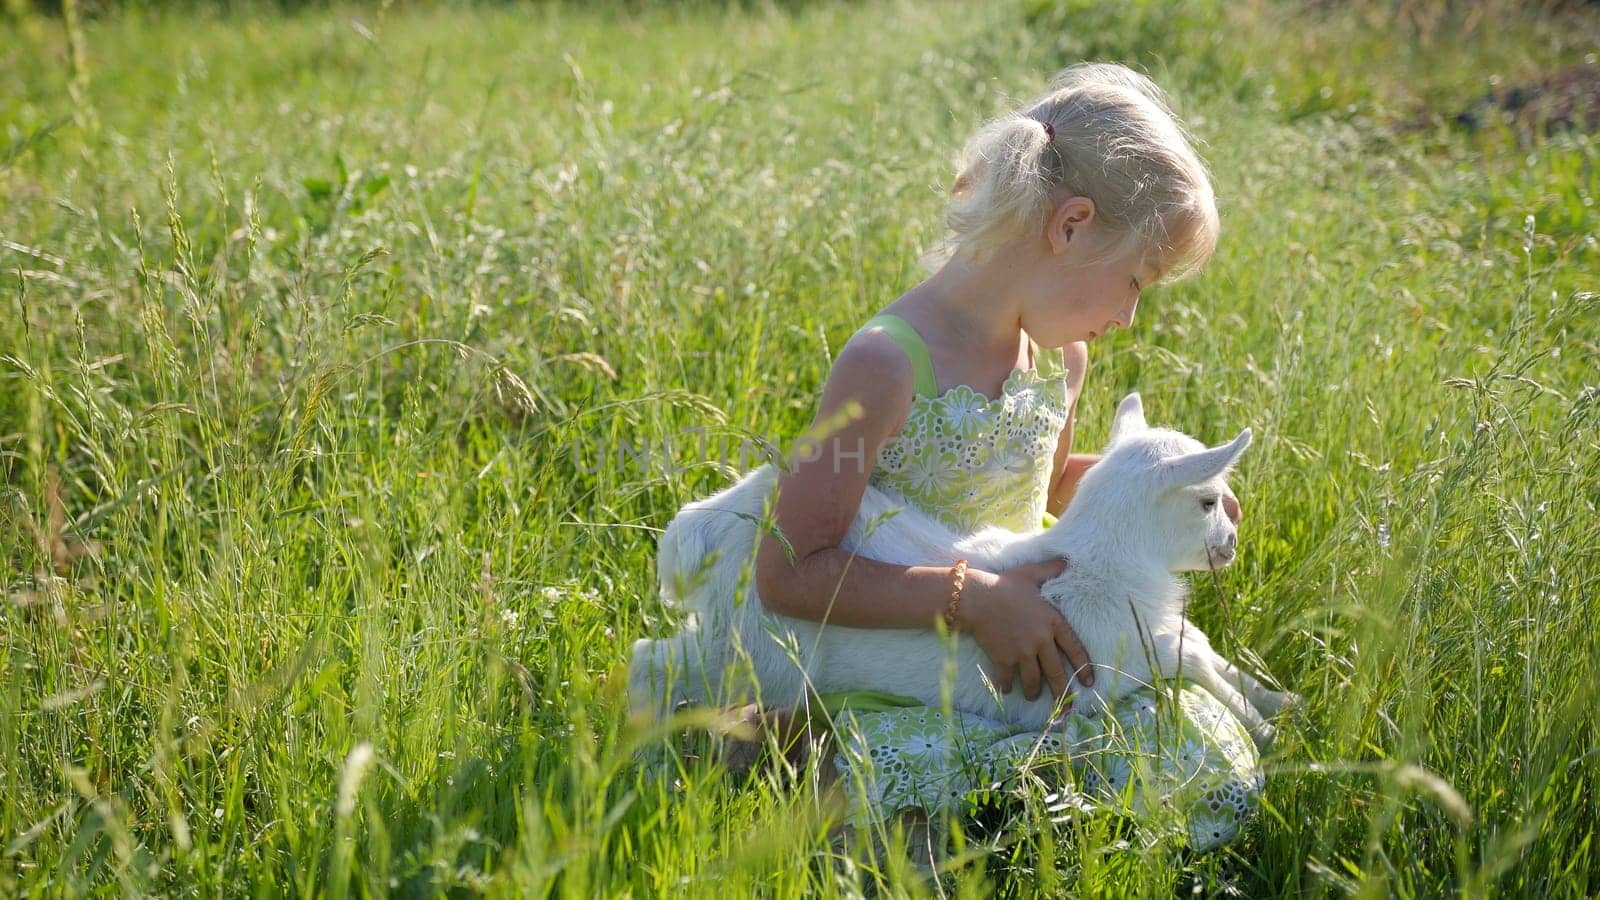 6 year old girl in the meadow with a small white goat